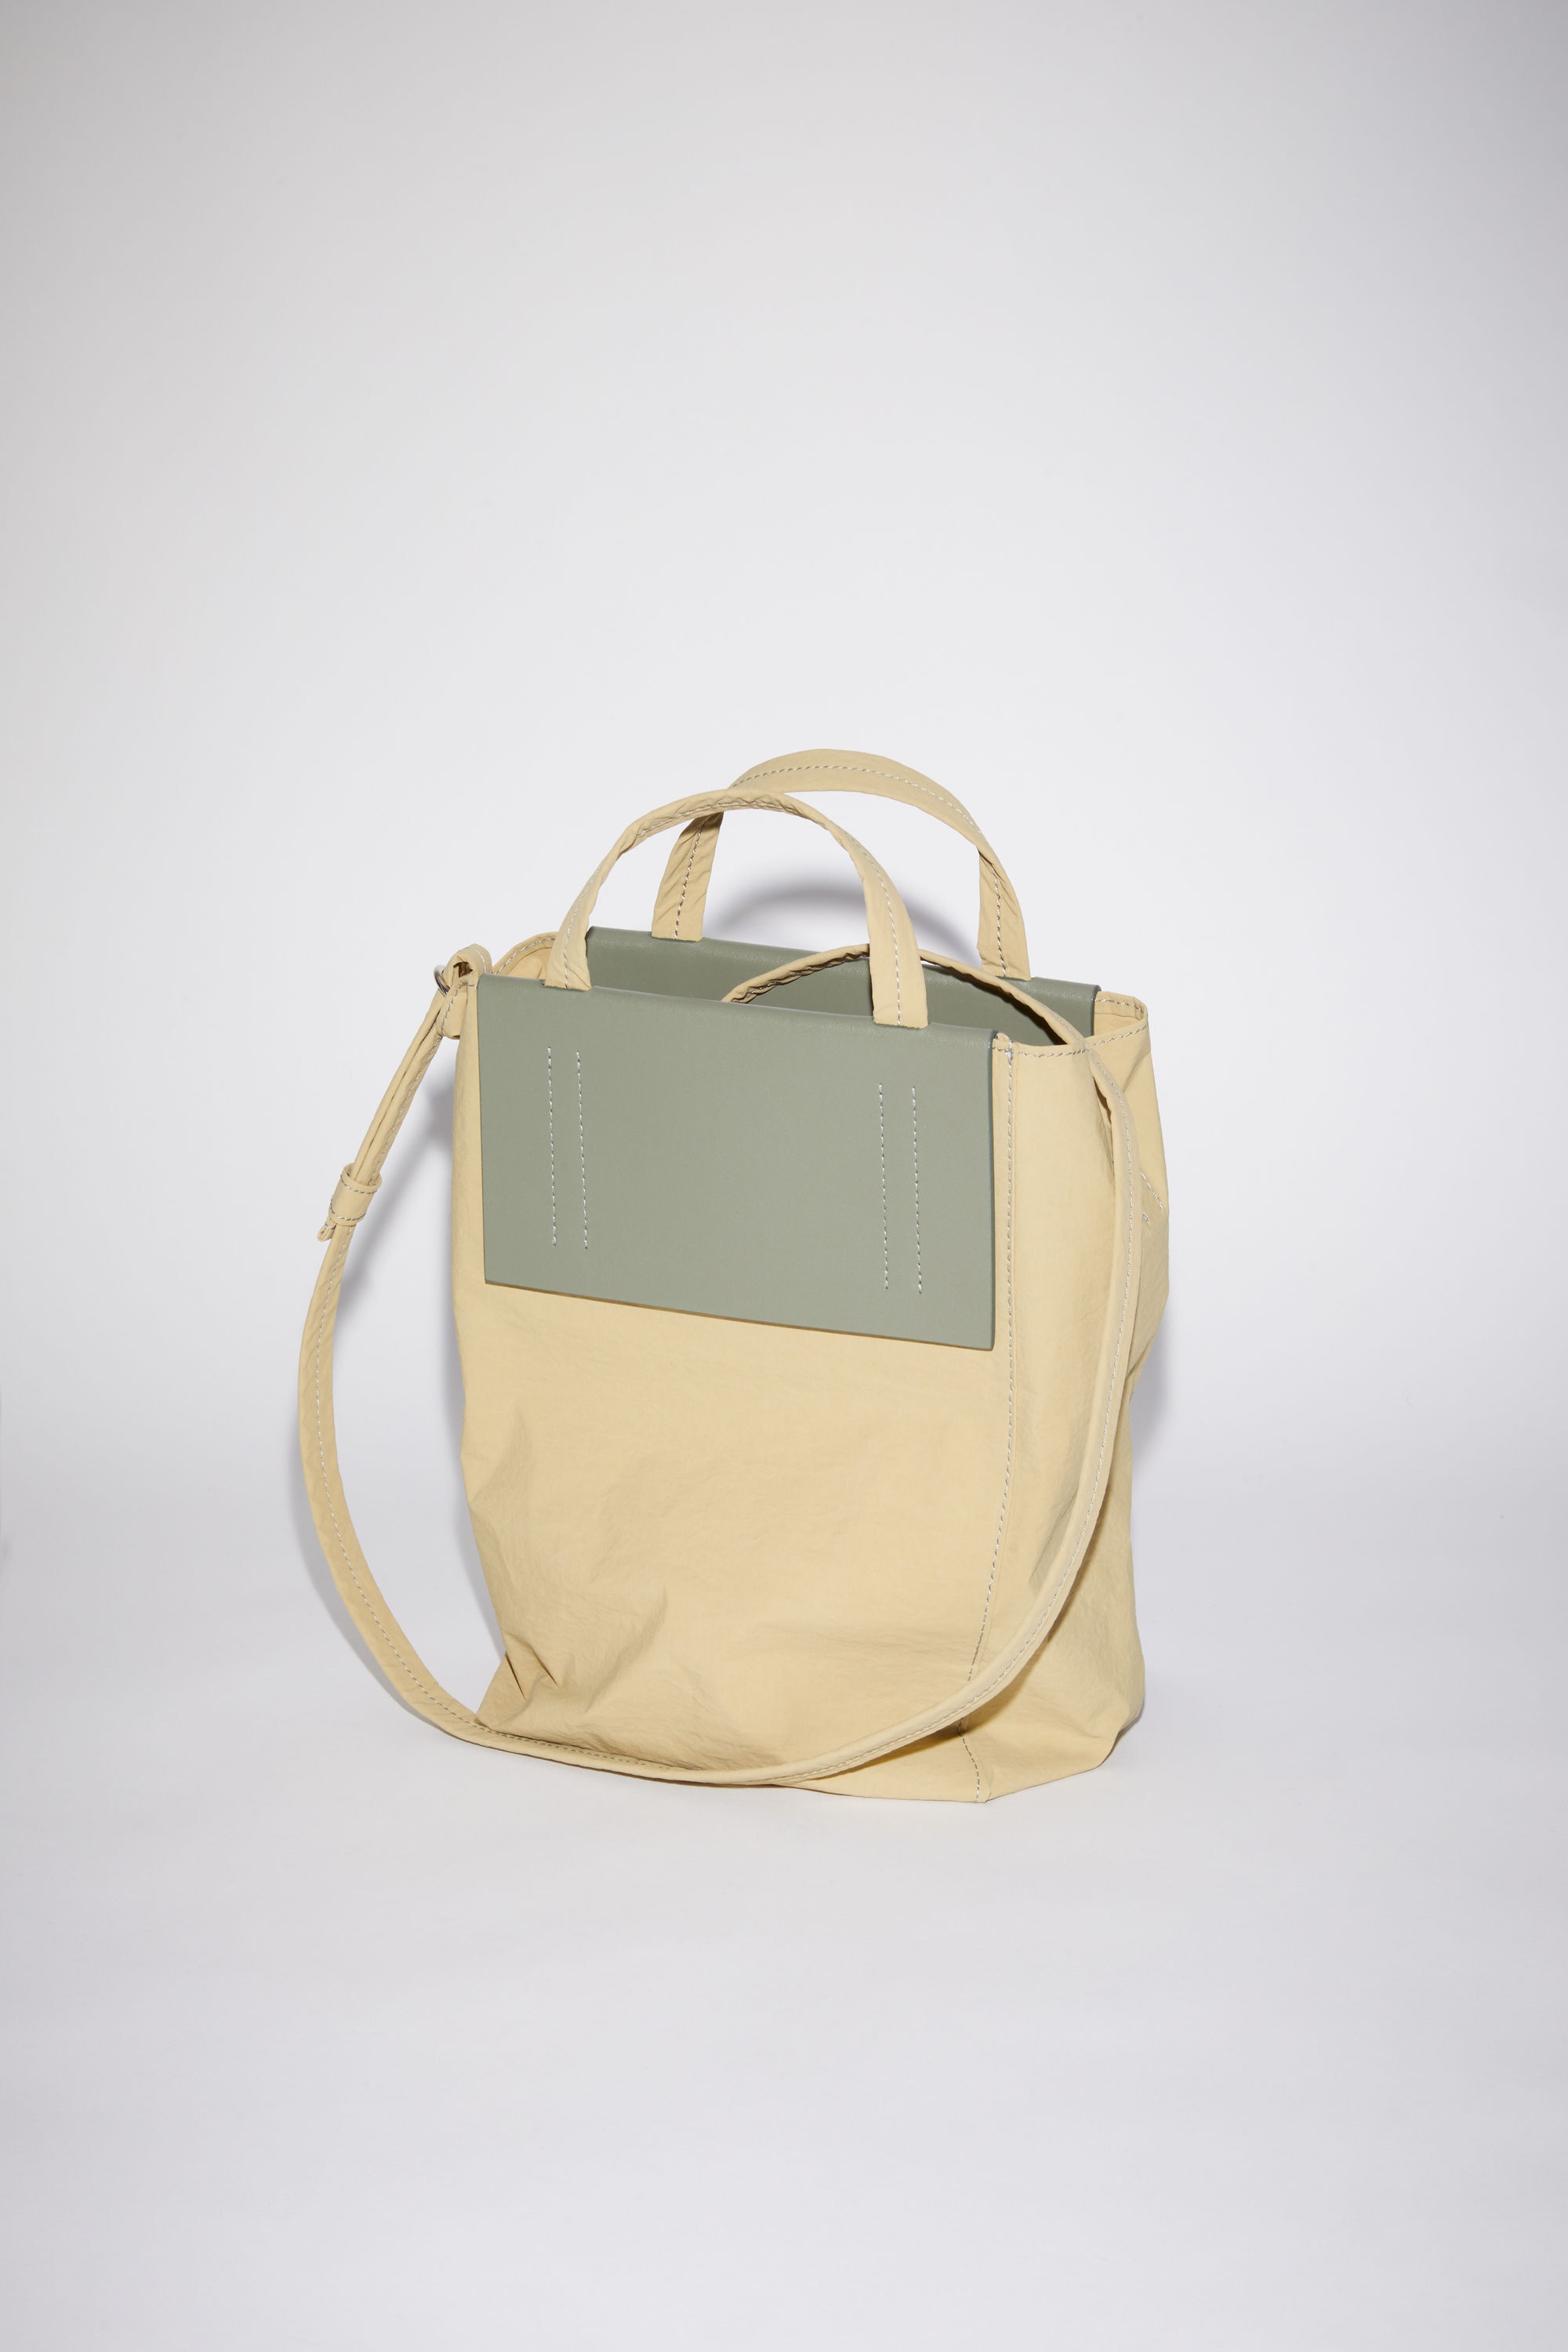 PAPERY NYLON TOTE BAG - Olive green/green - 4